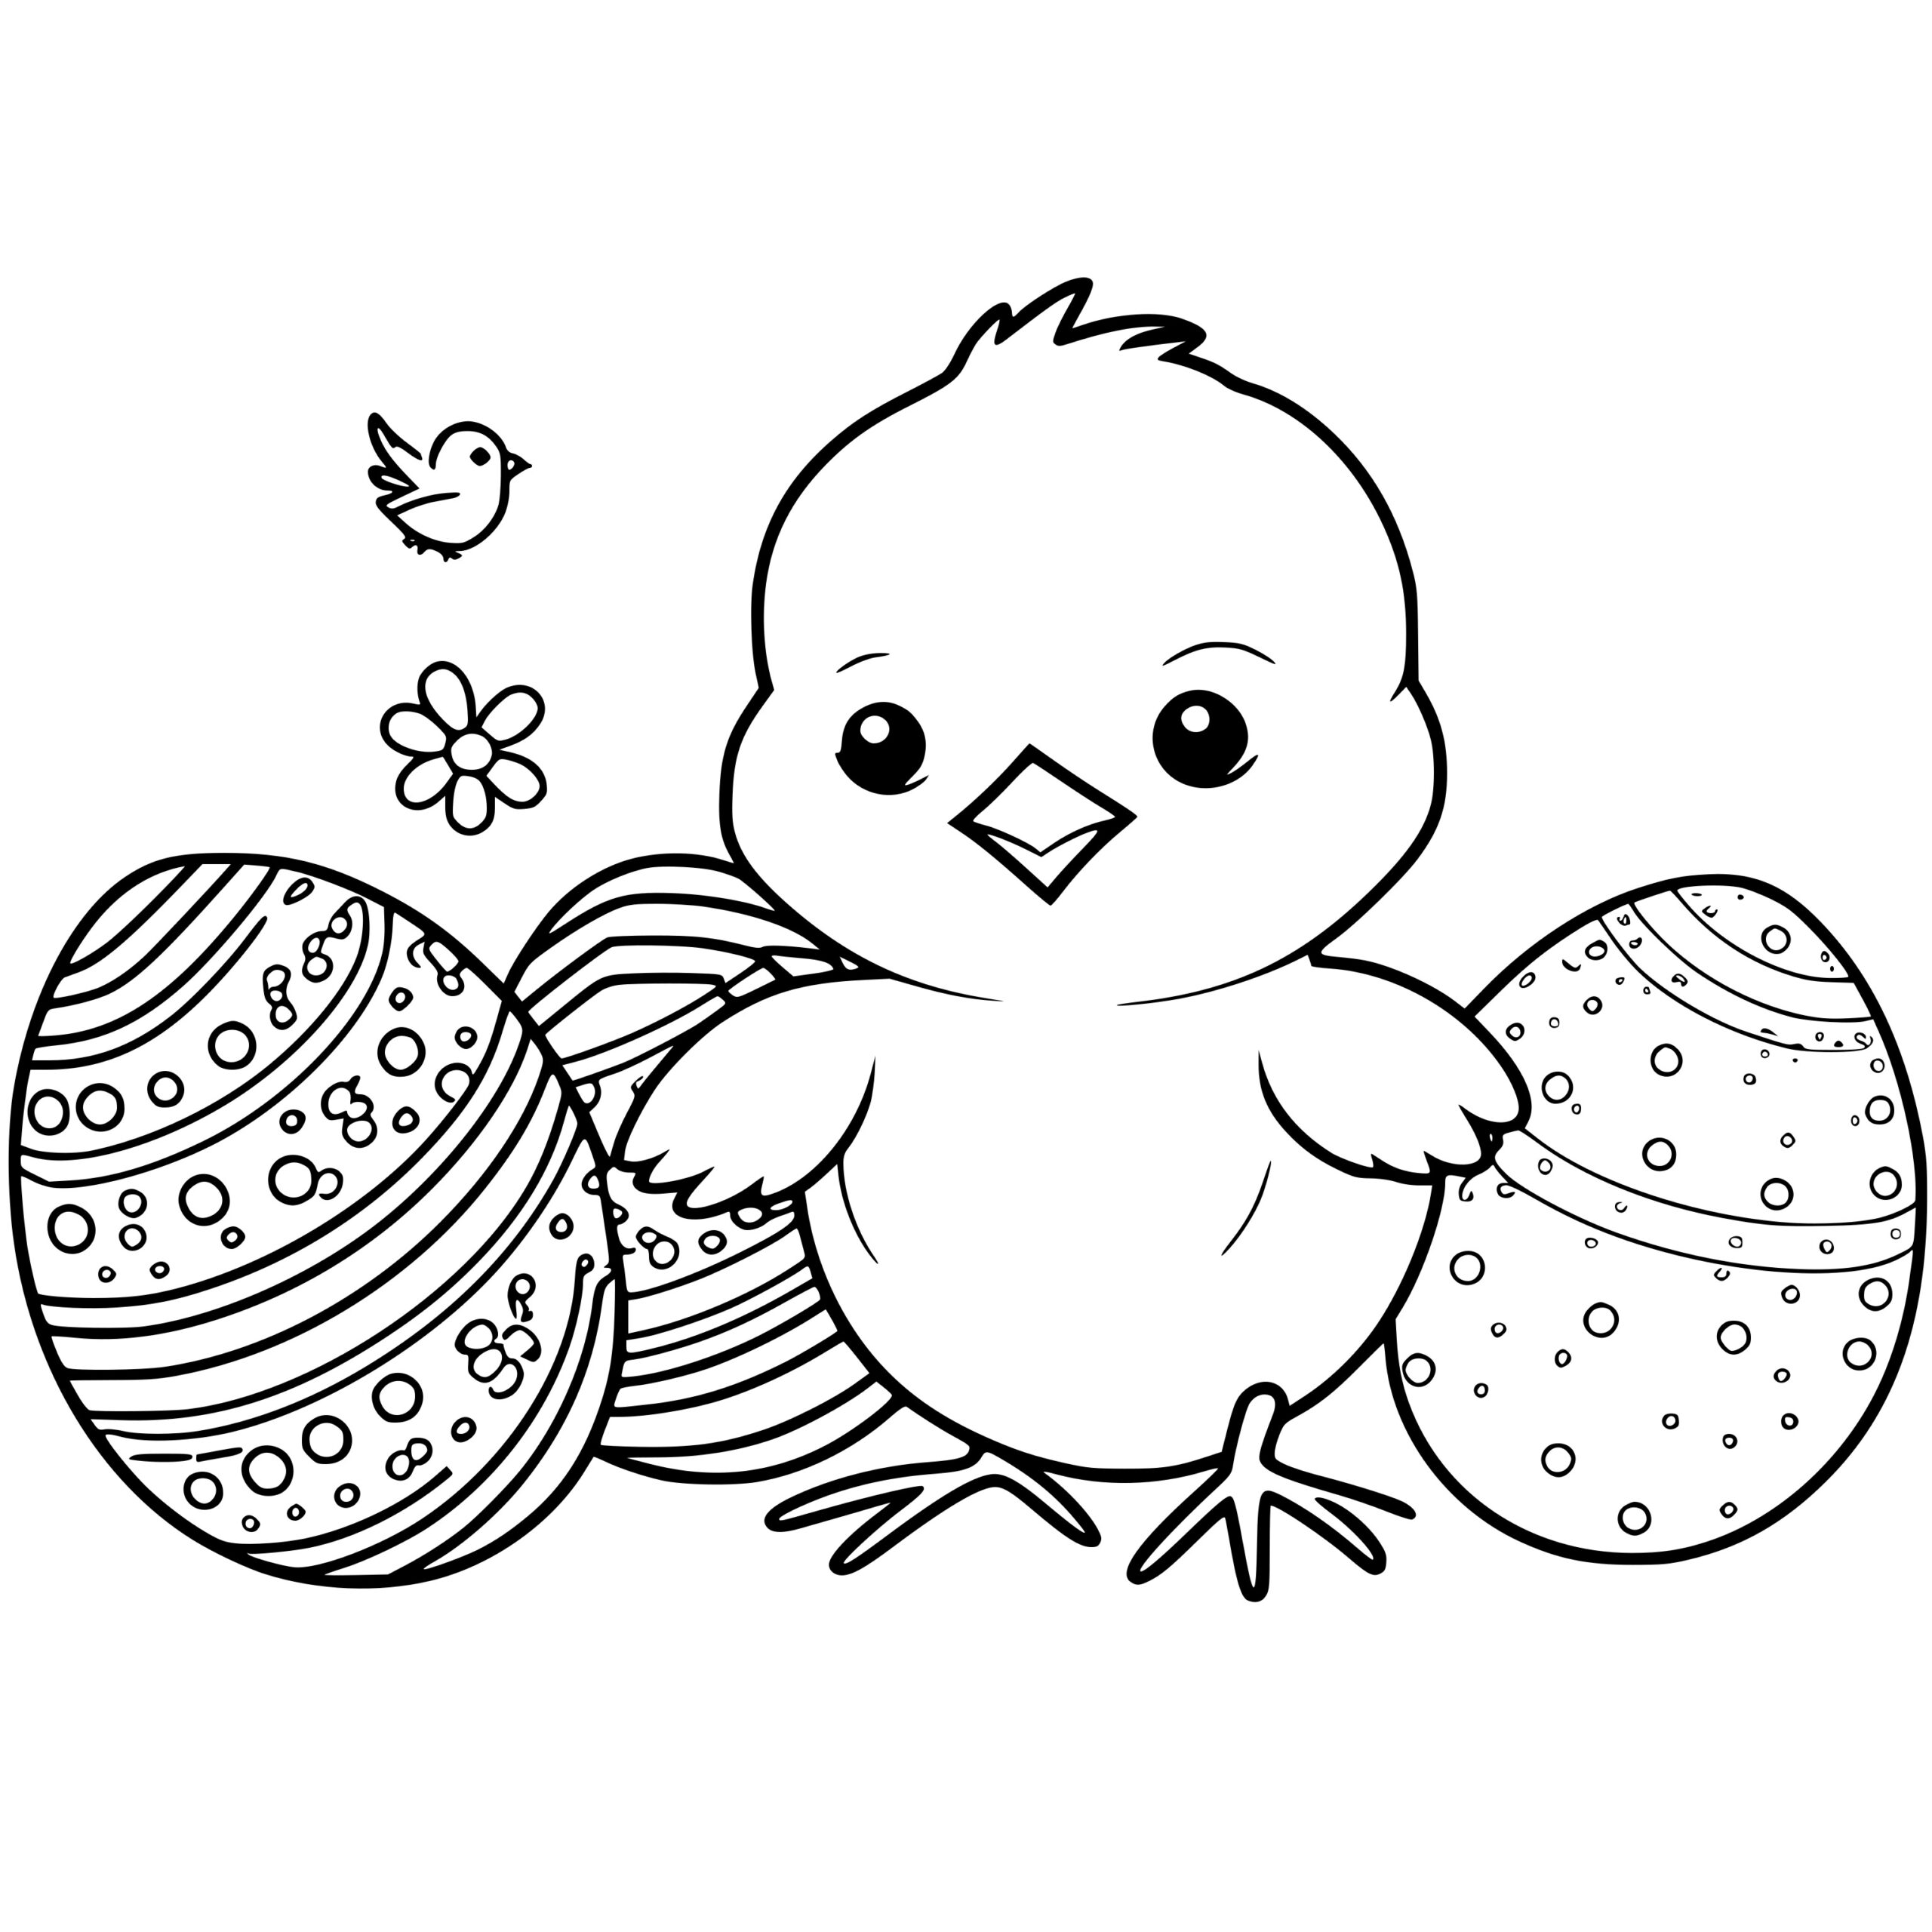 Baby Chick with Easter Eggs SVG File for Cricut, Silhouette, Laser Machines